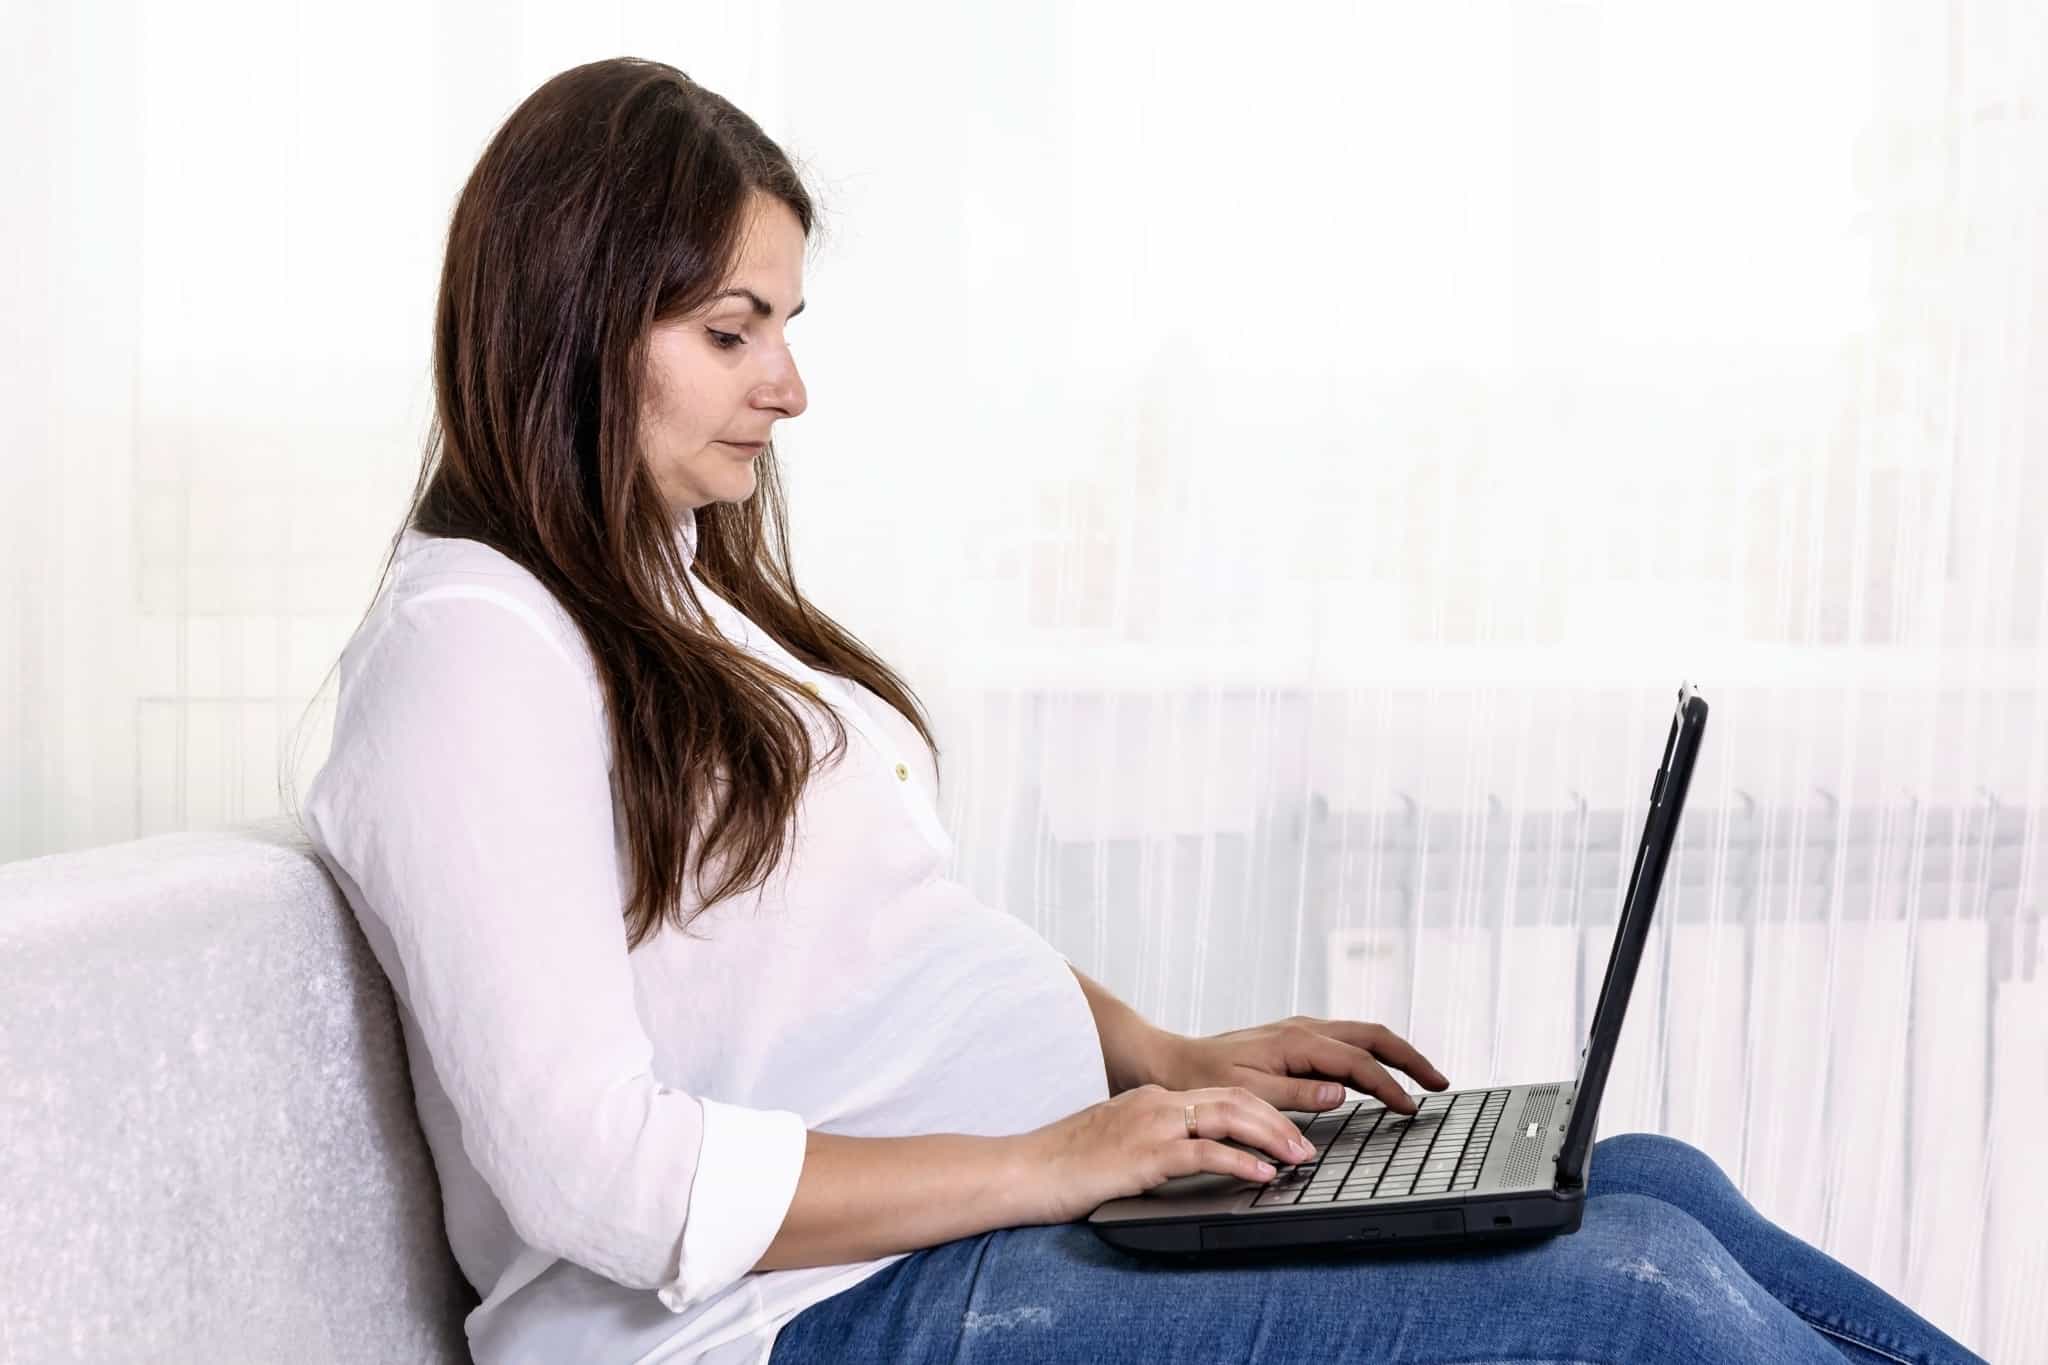 young pregnant woman messing around with her laptop on her lap